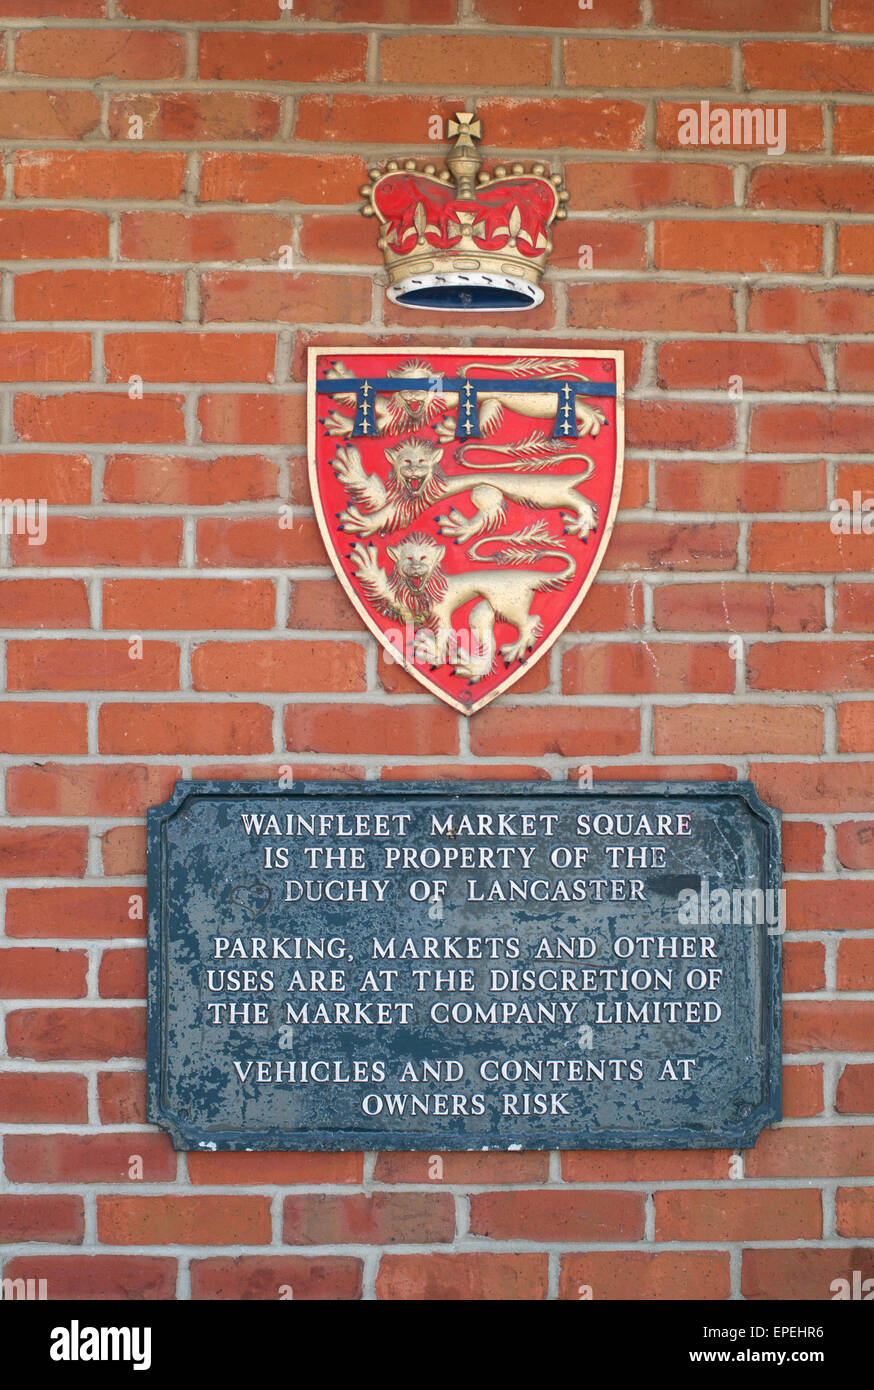 Coat of arms of the Duchy of Lancaster within Wainfleet market square, Lincolnshire, England, UK Stock Photo